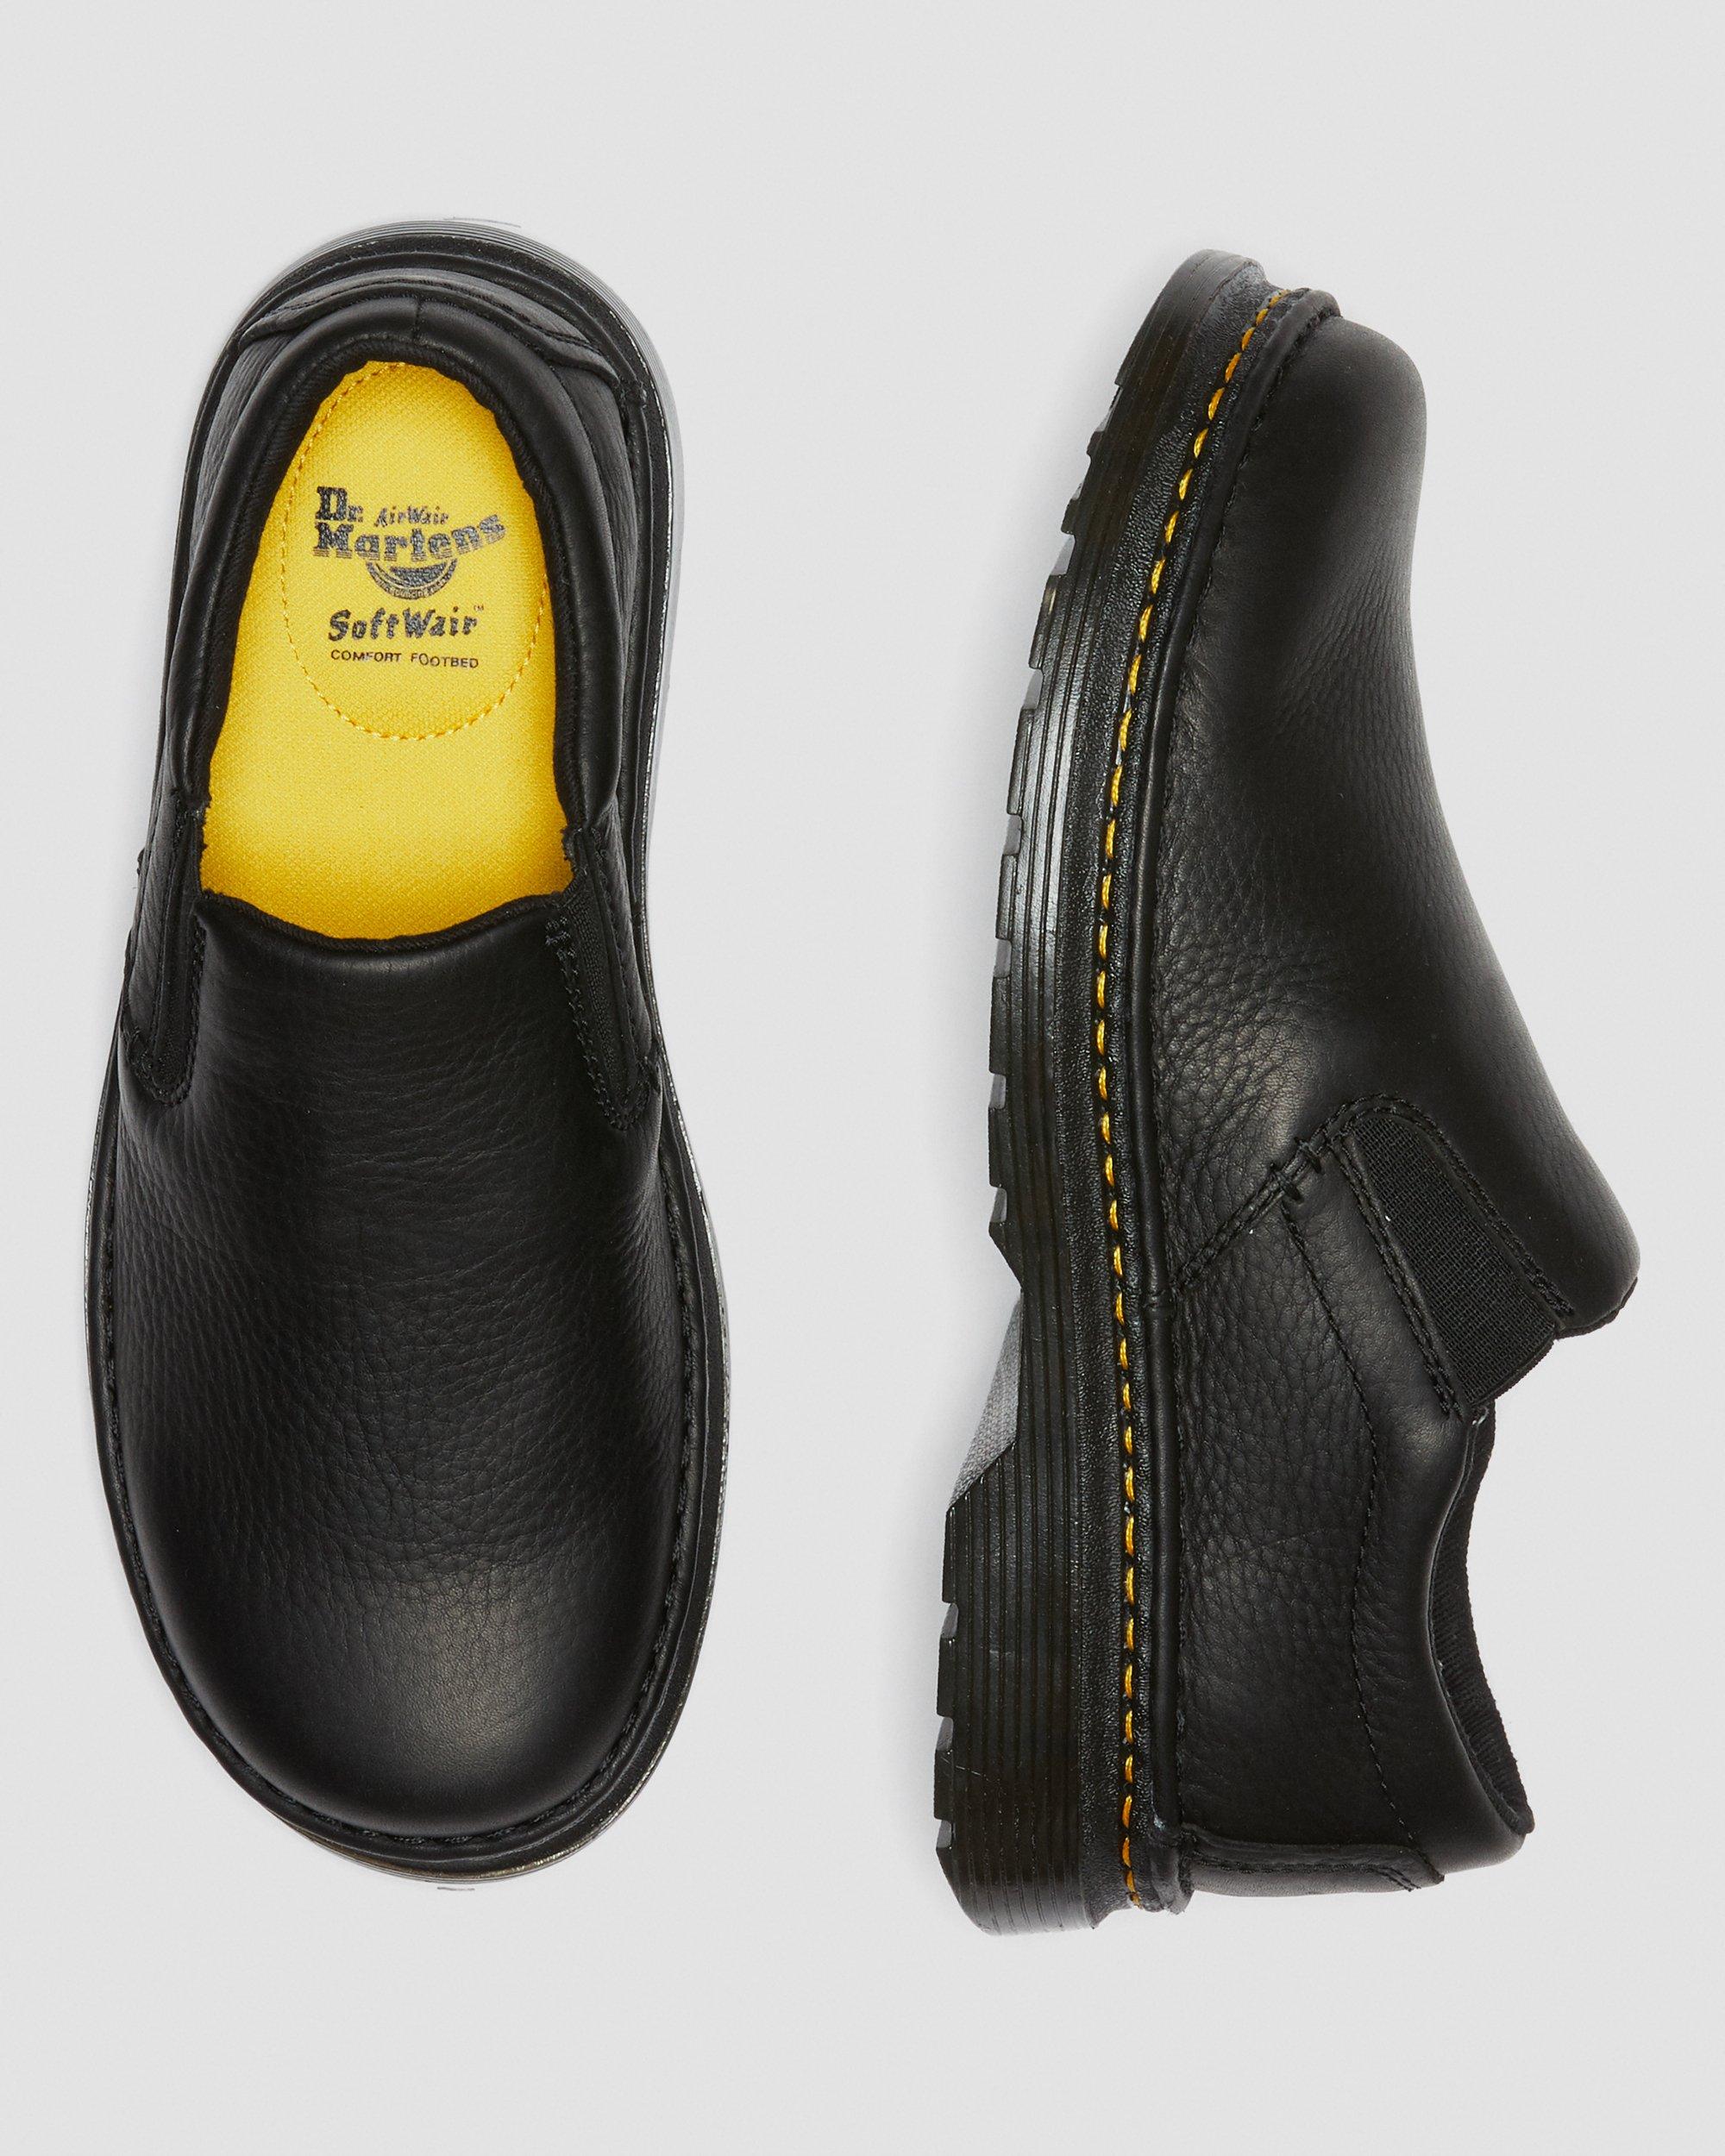 Boyle Men's Grizzly Leather Slip On Shoes in Black | Dr. Martens